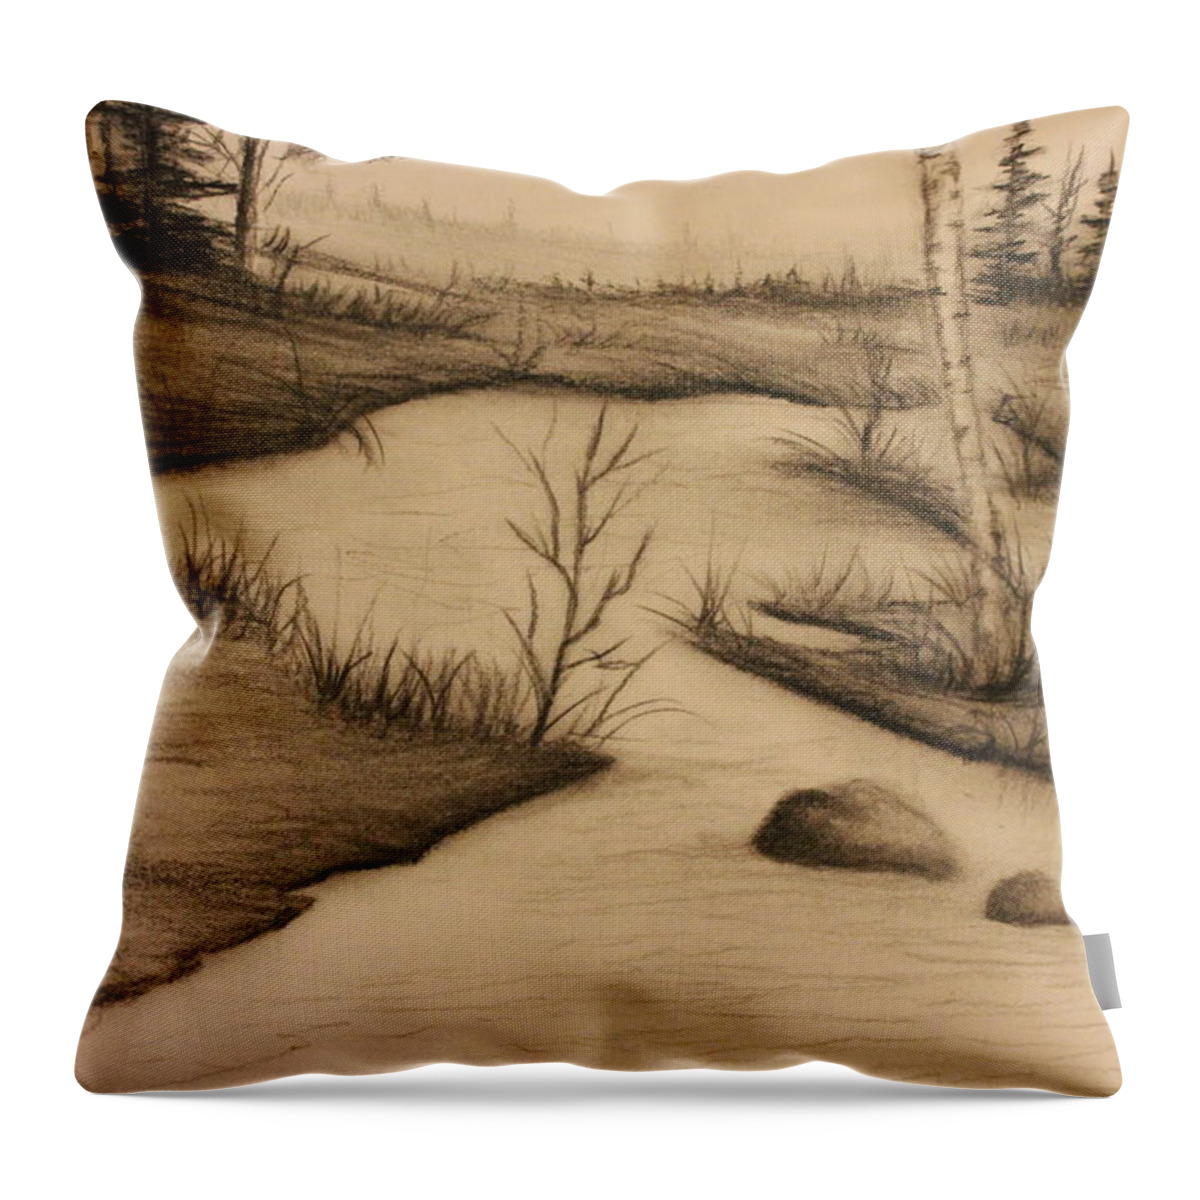 Drawings Throw Pillow featuring the drawing Misty River by Ricky Haug